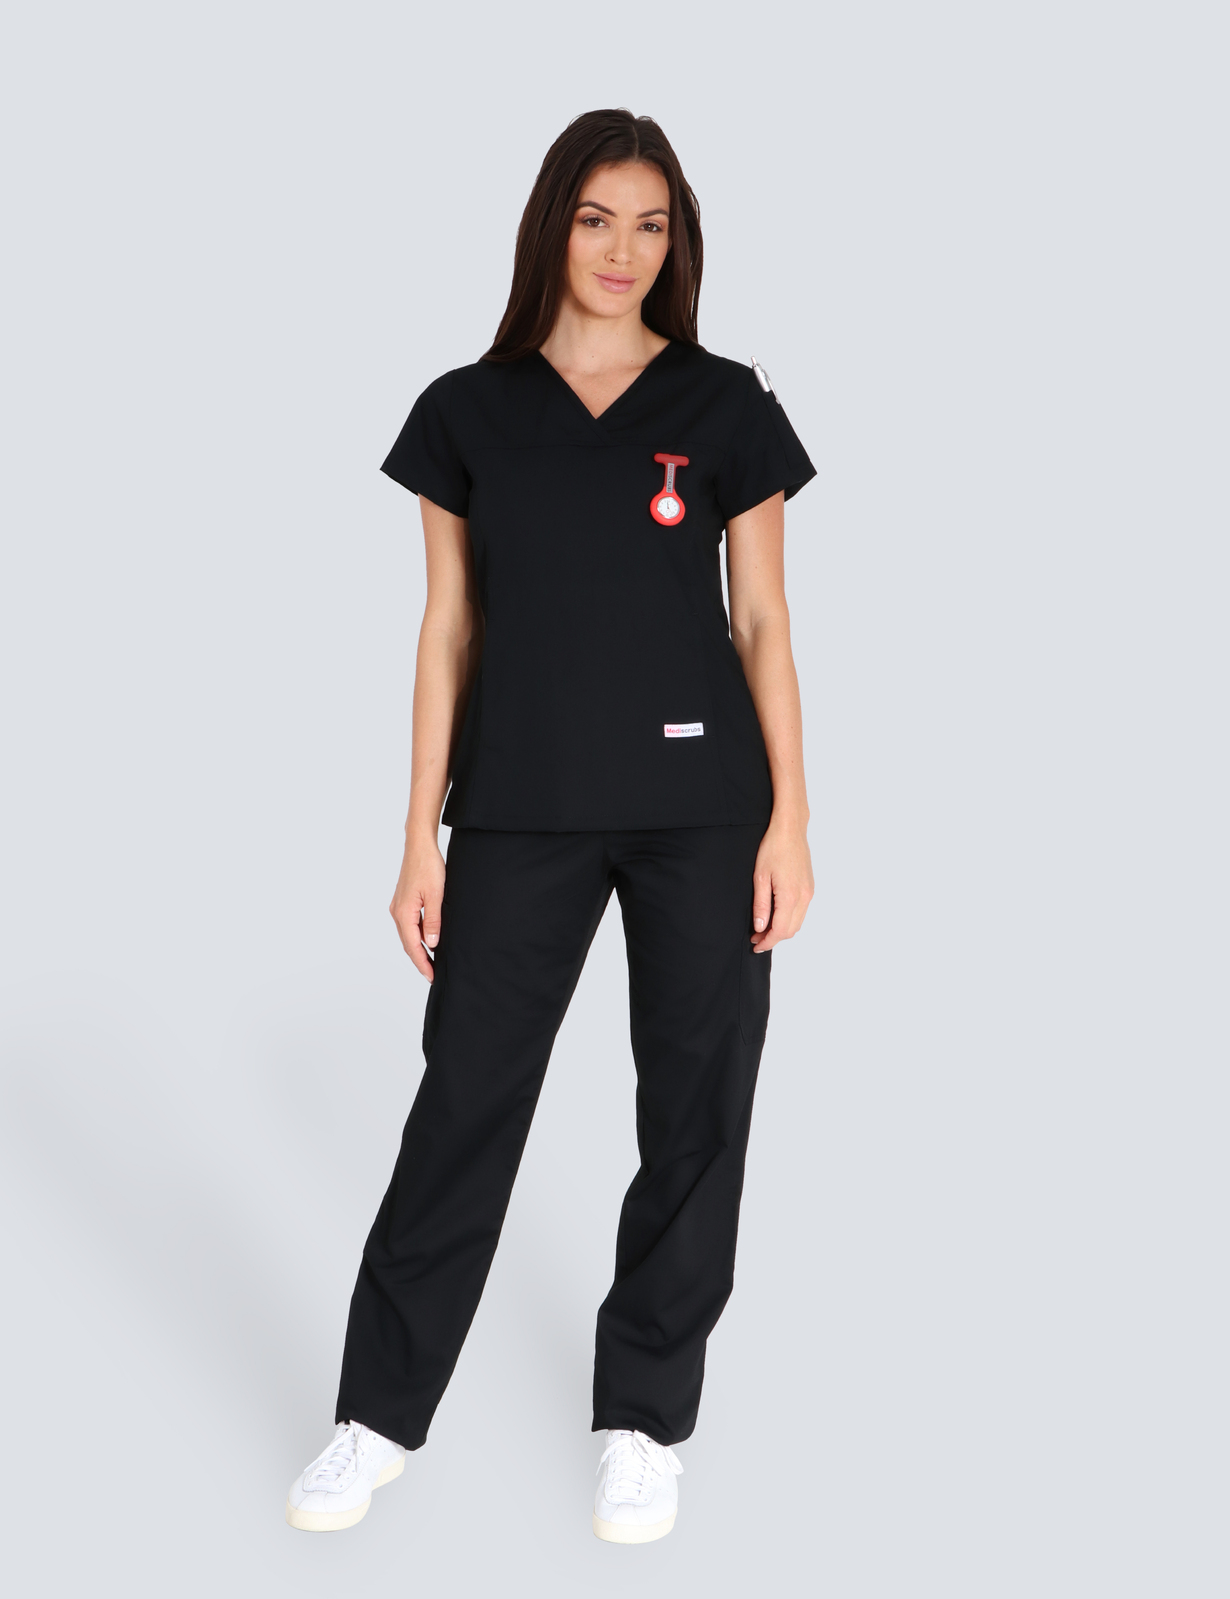 Prince Charles Hospital - Medical Imaging (Women's Fit Solid Top